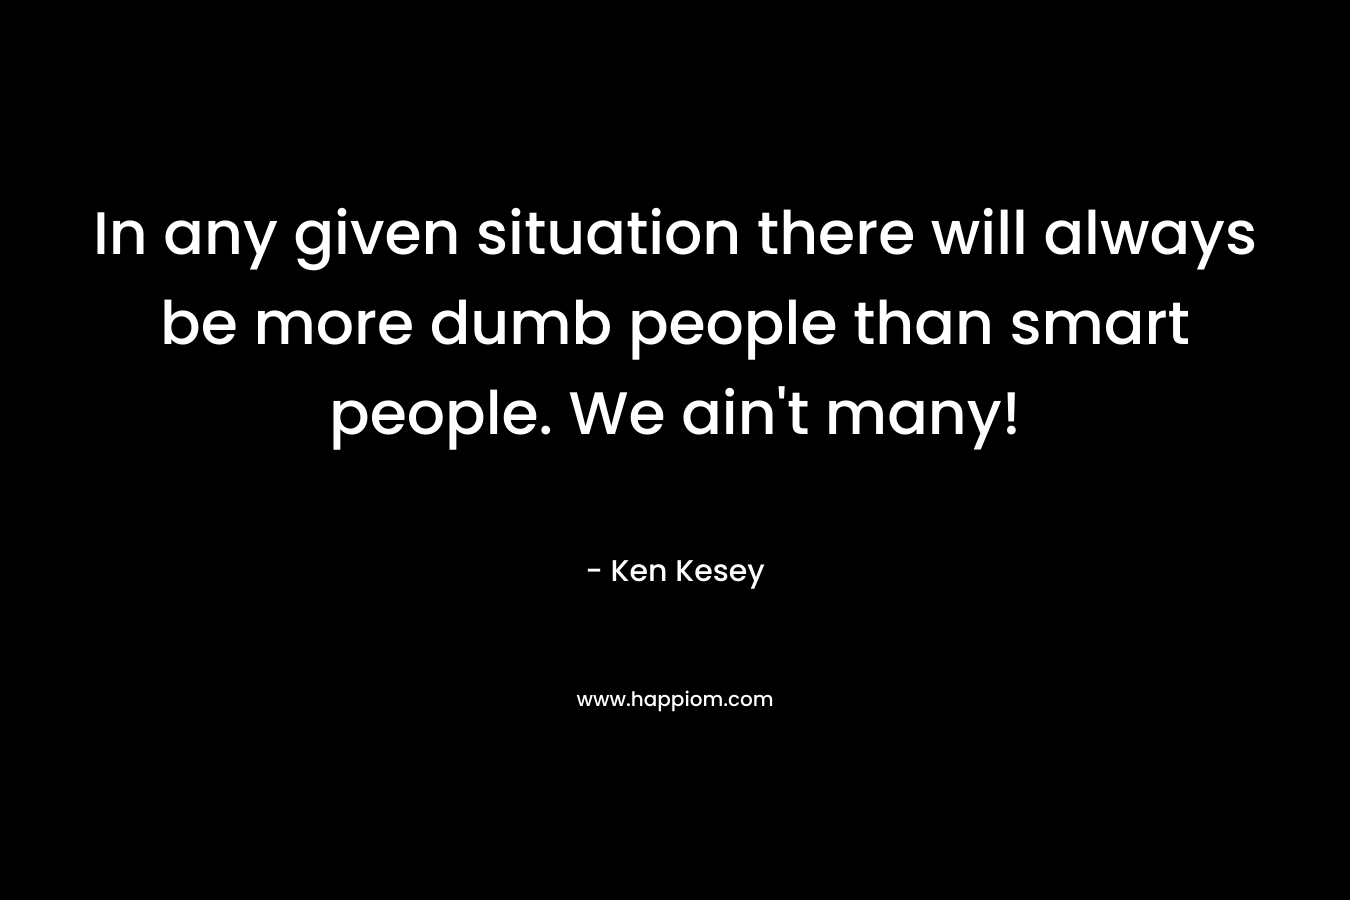 In any given situation there will always be more dumb people than smart people. We ain't many!